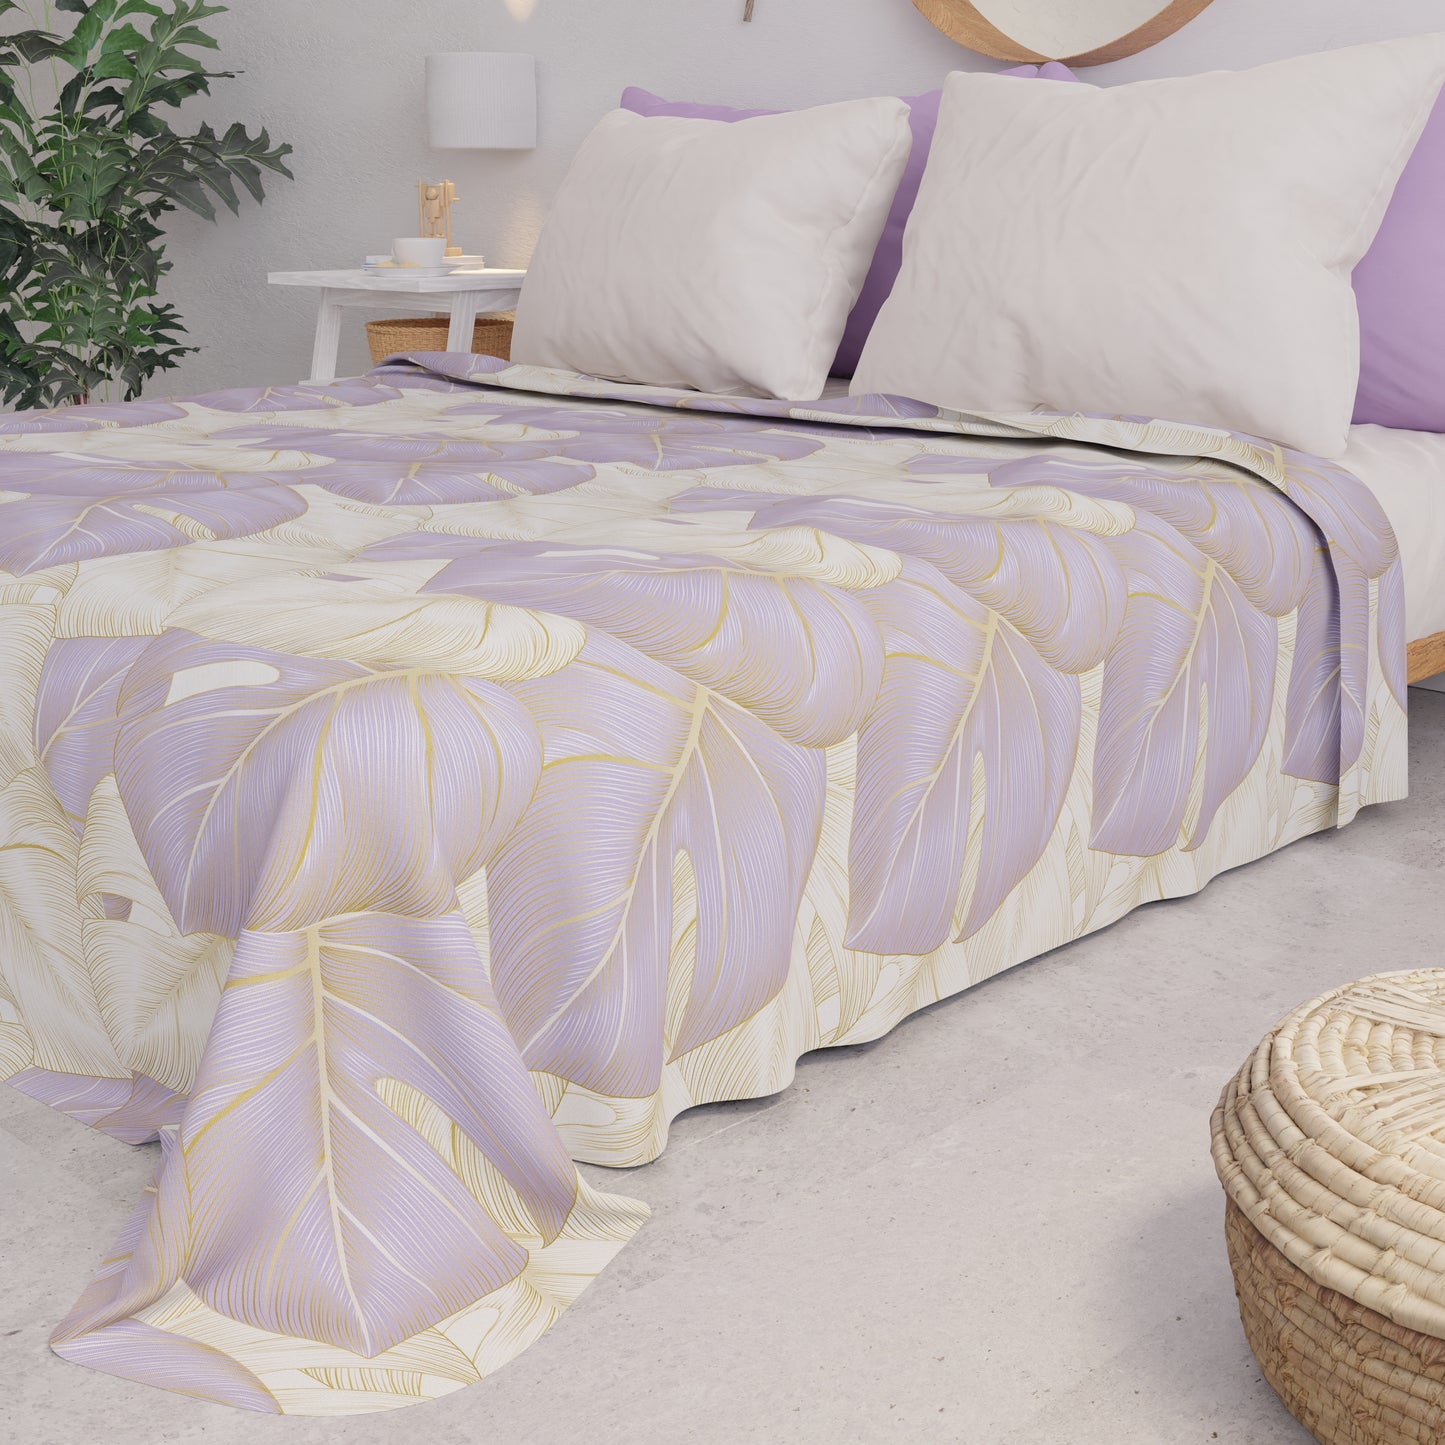 Summer Bedspread, Lightweight Blanket, Bedspread Sheets, Tropical Lilac and Gold